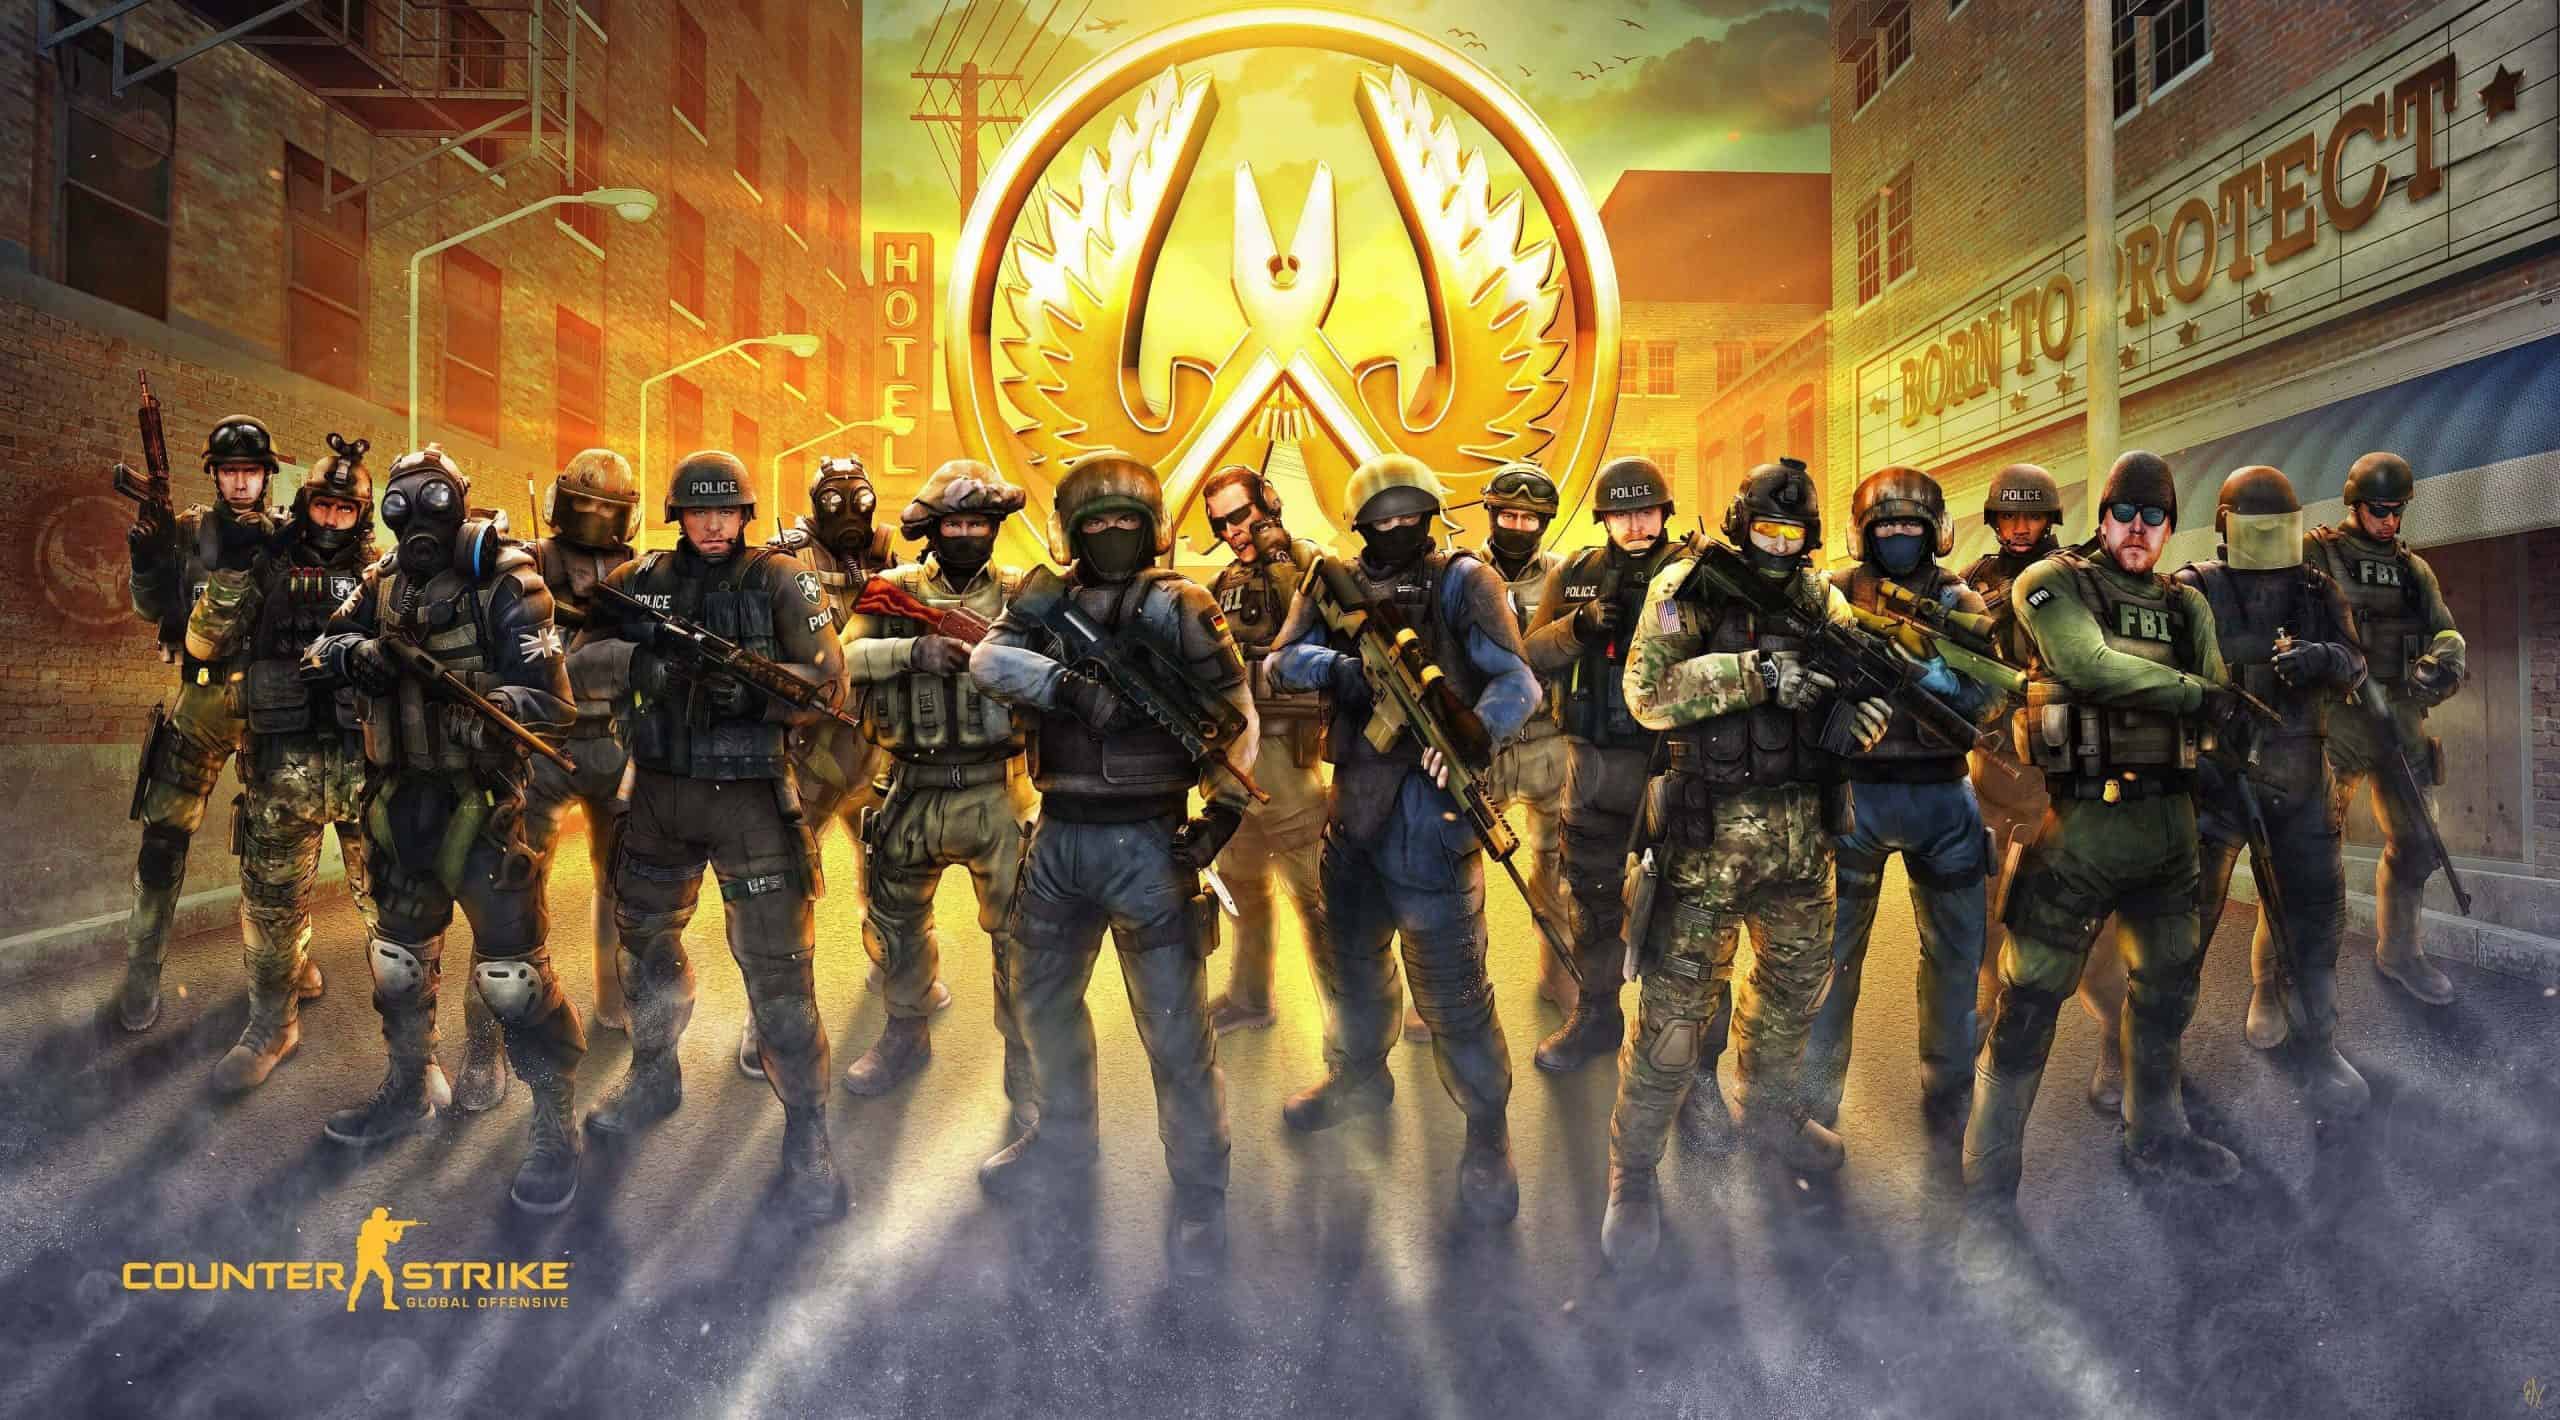 In-game economy and resource management: the key to success in CSGO's tactical gameplay